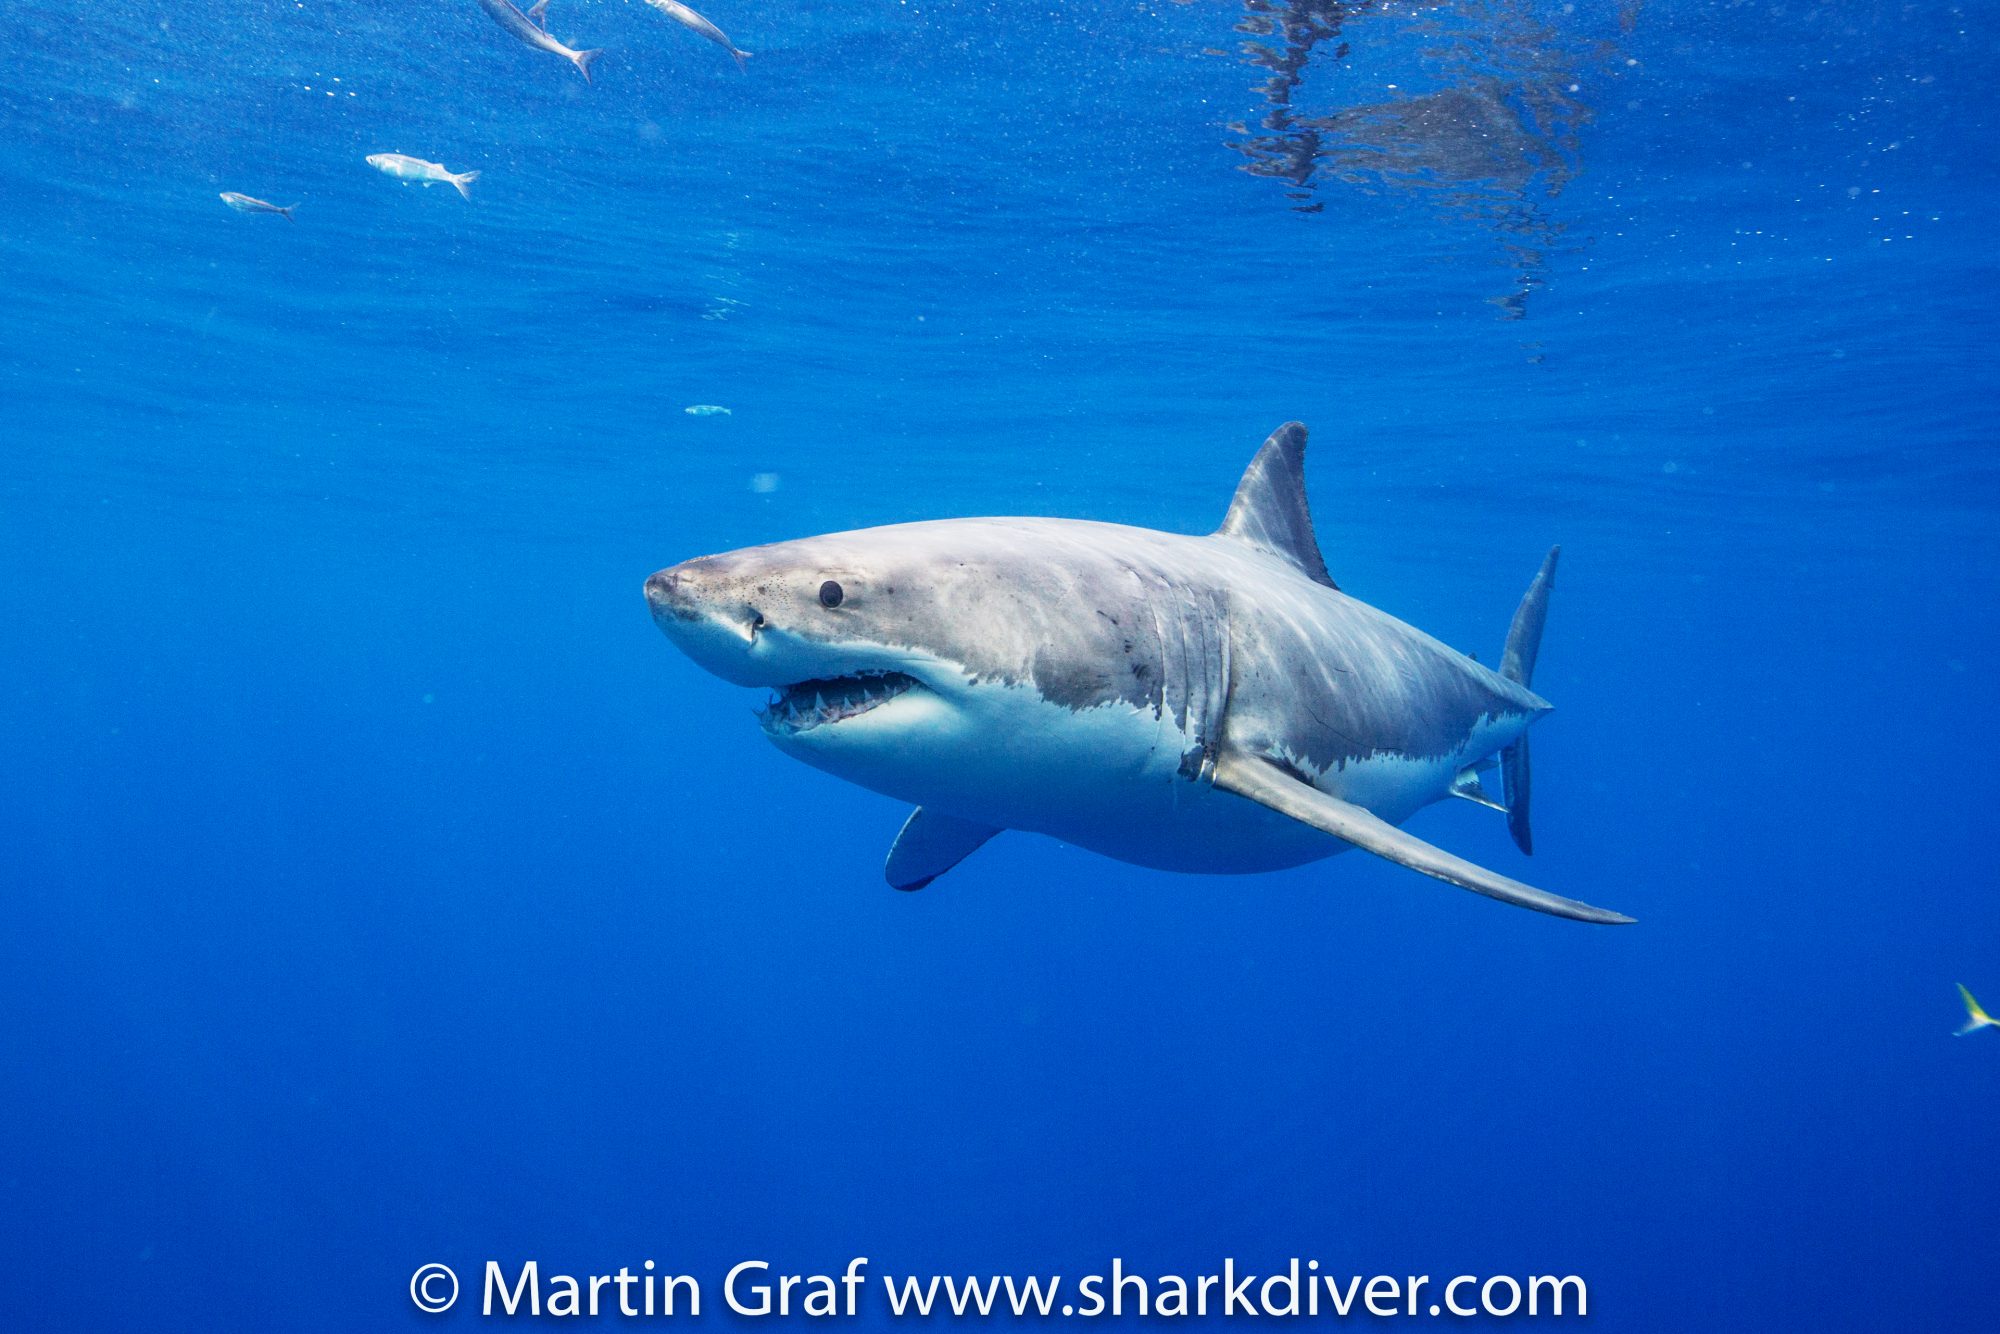 Great White, photo by Martin Graf of Shark Diver